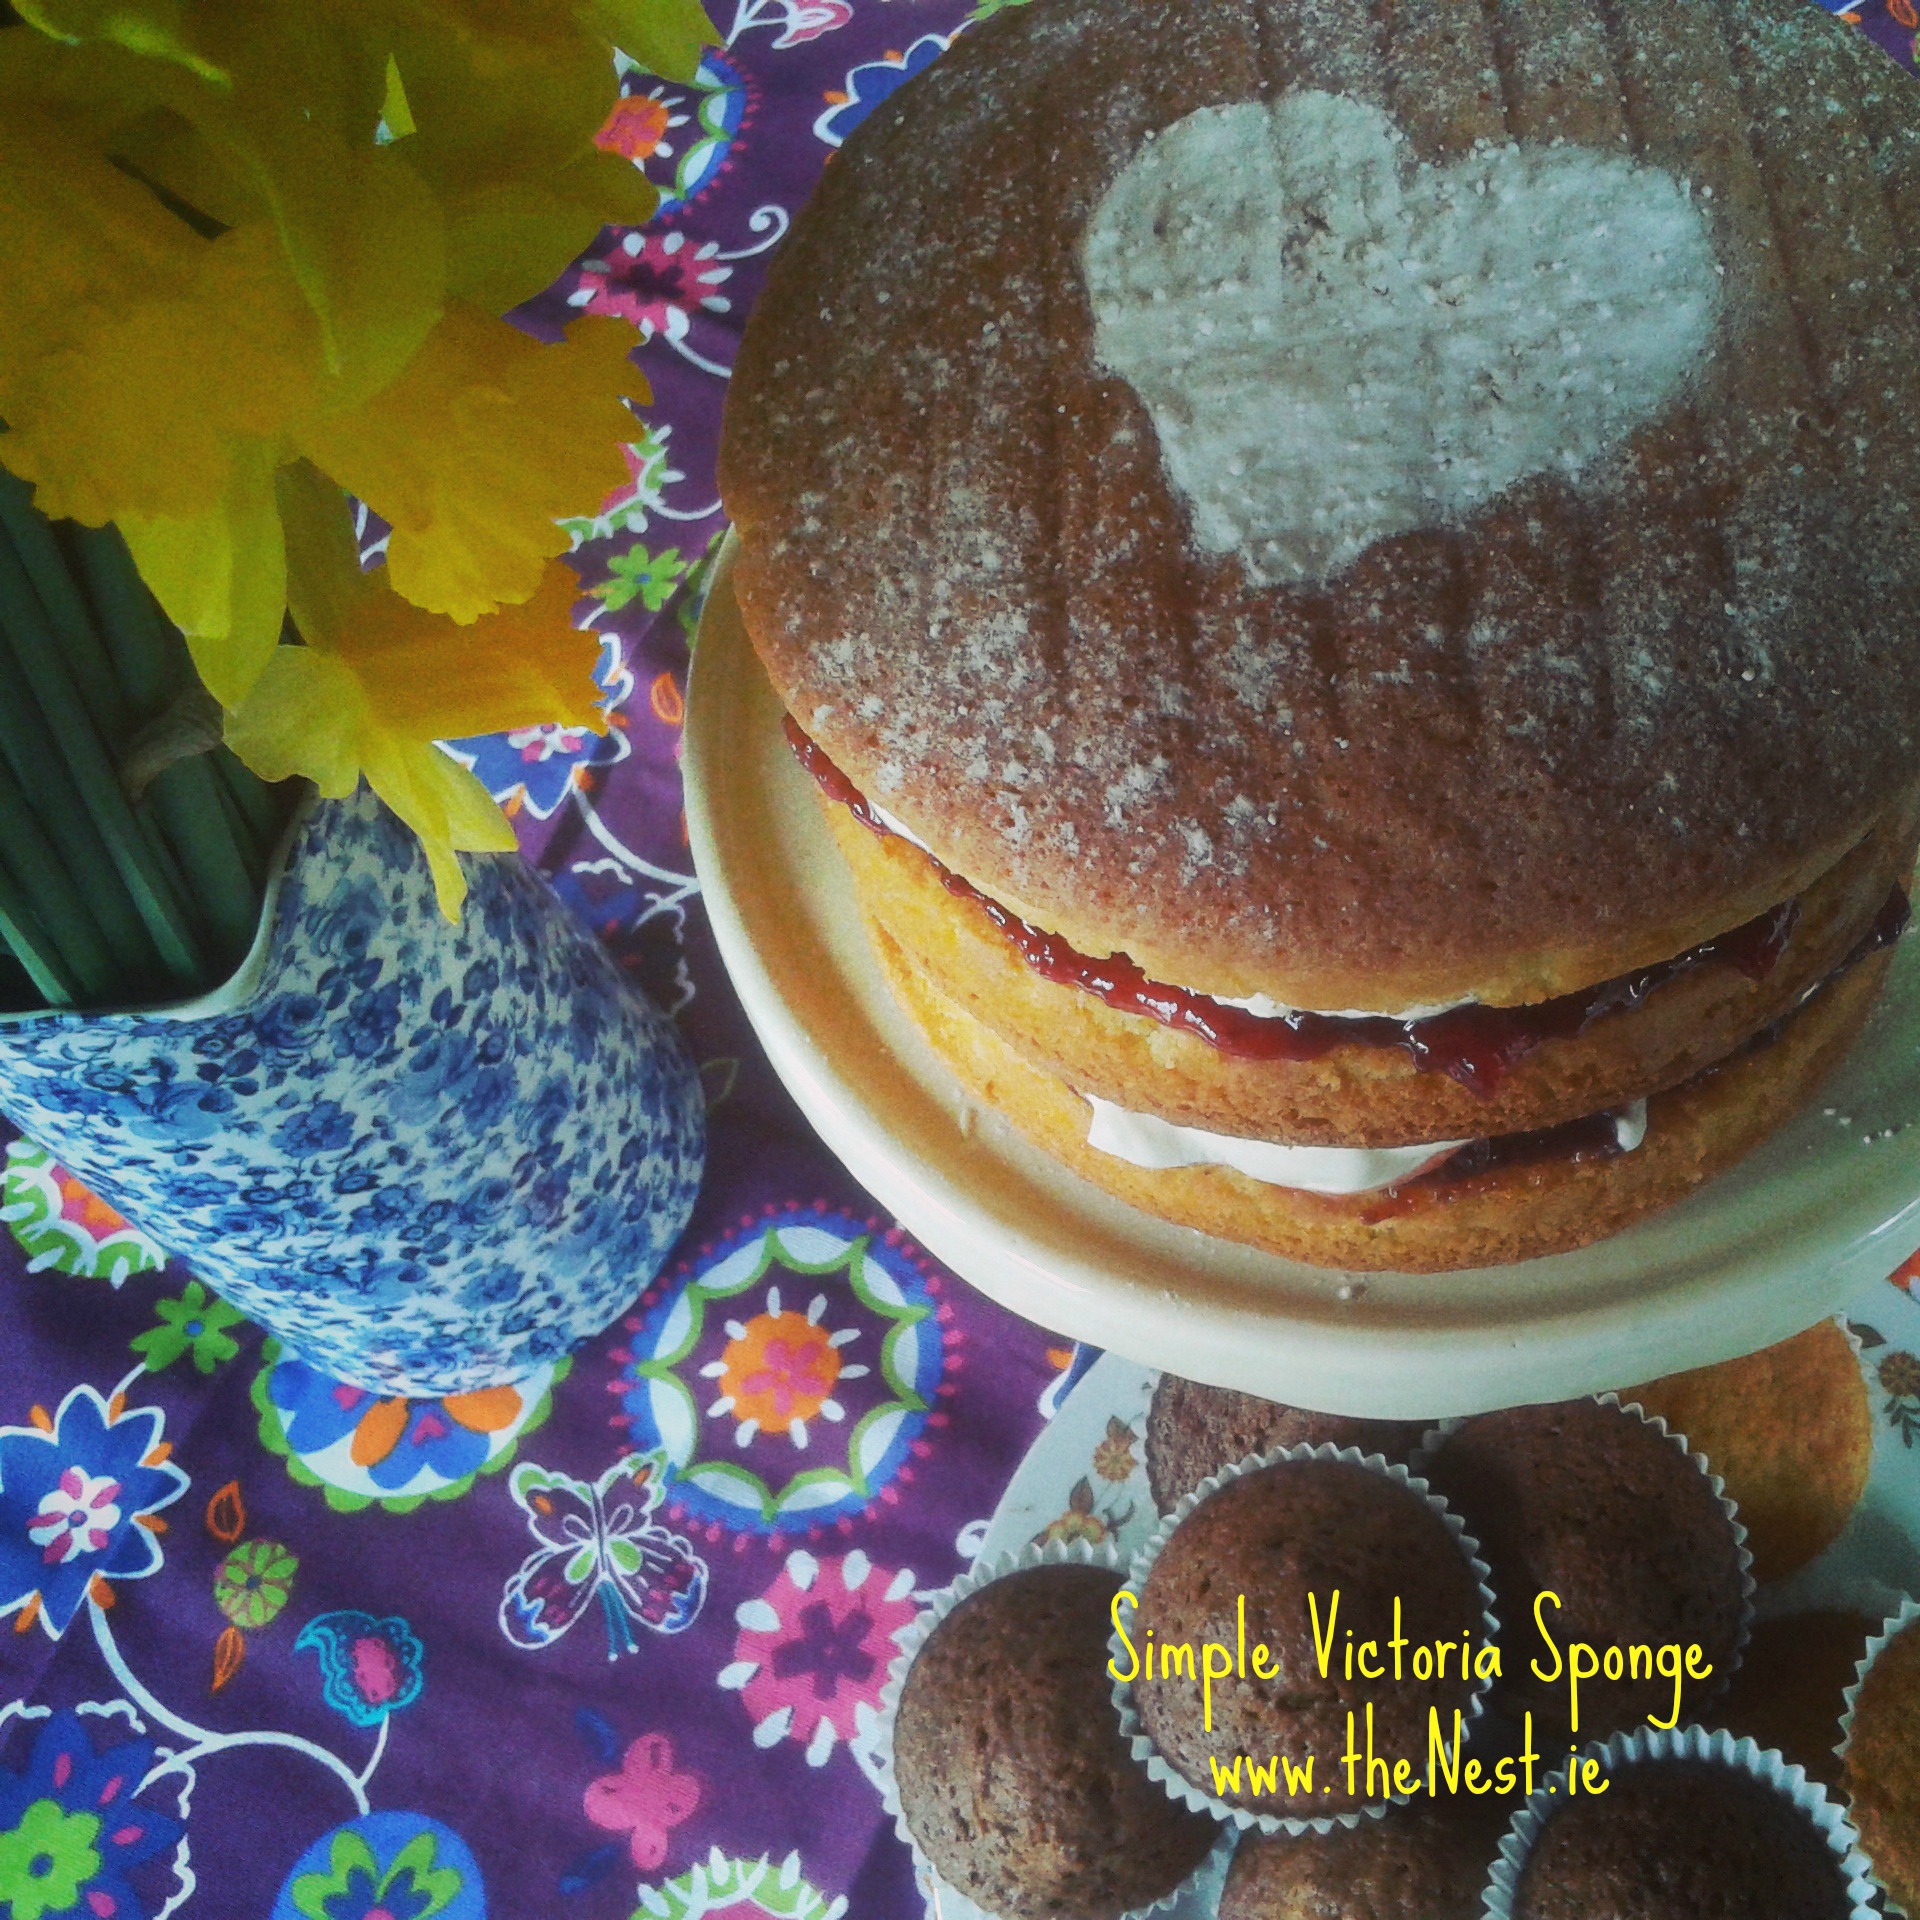 Reasons for Cake (Simple and delicious Victoria Sponge Recipe)